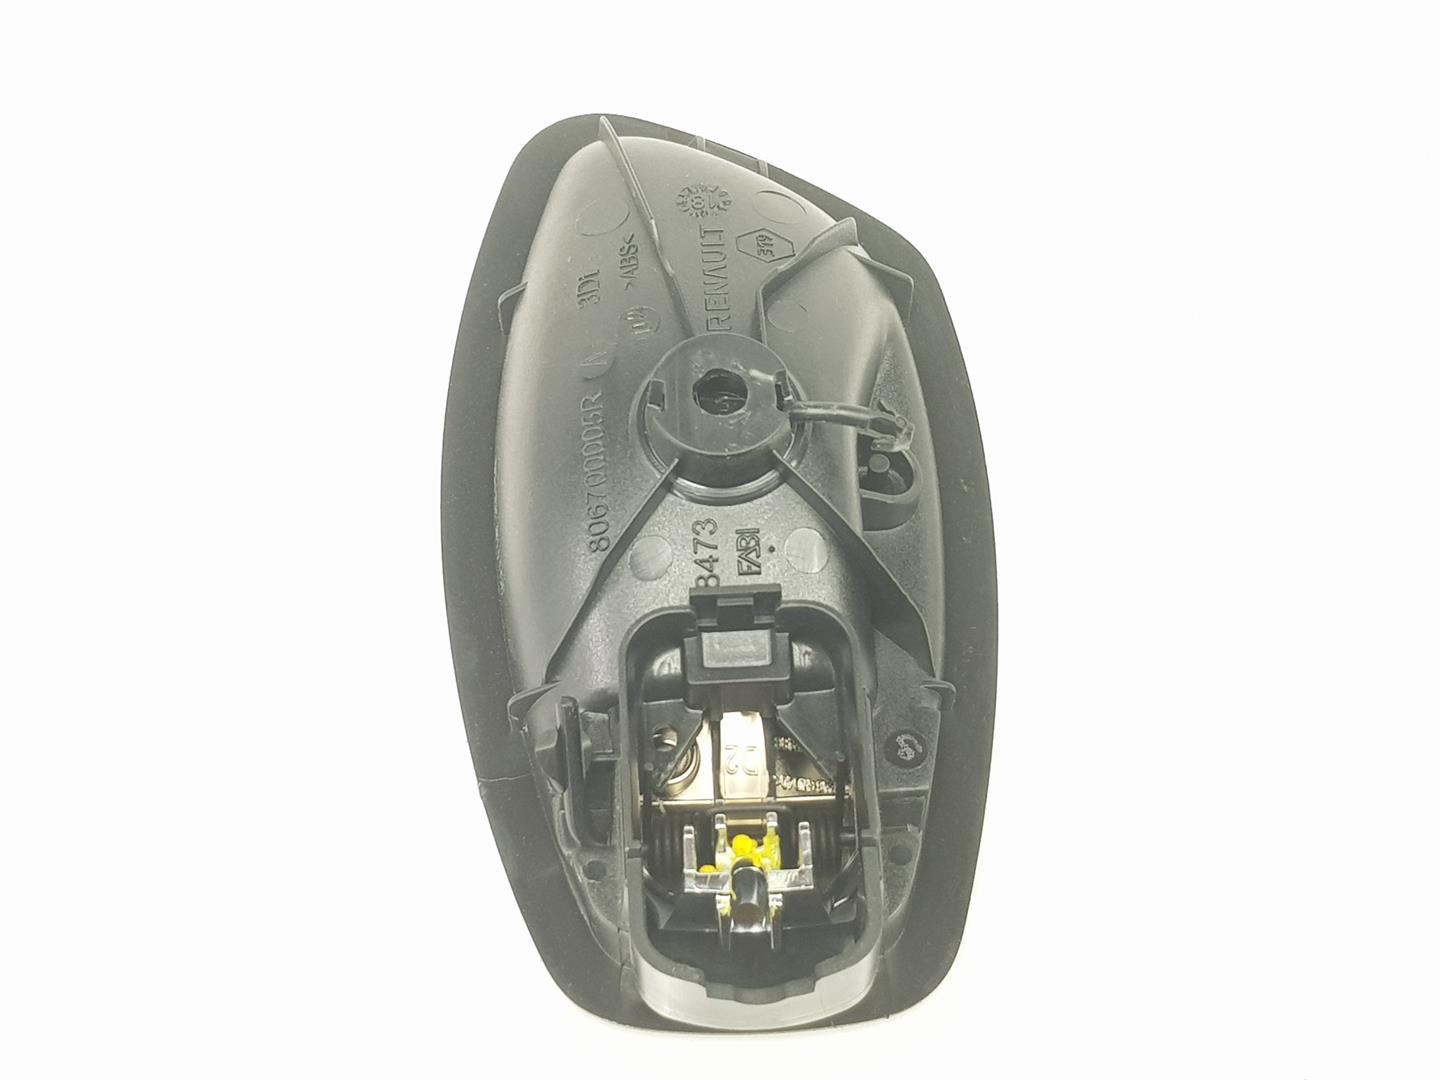 RENAULT Clio 3 generation (2005-2012) Right Rear Internal Opening Handle 806700005R, 806700005R, 1141CB 22741173